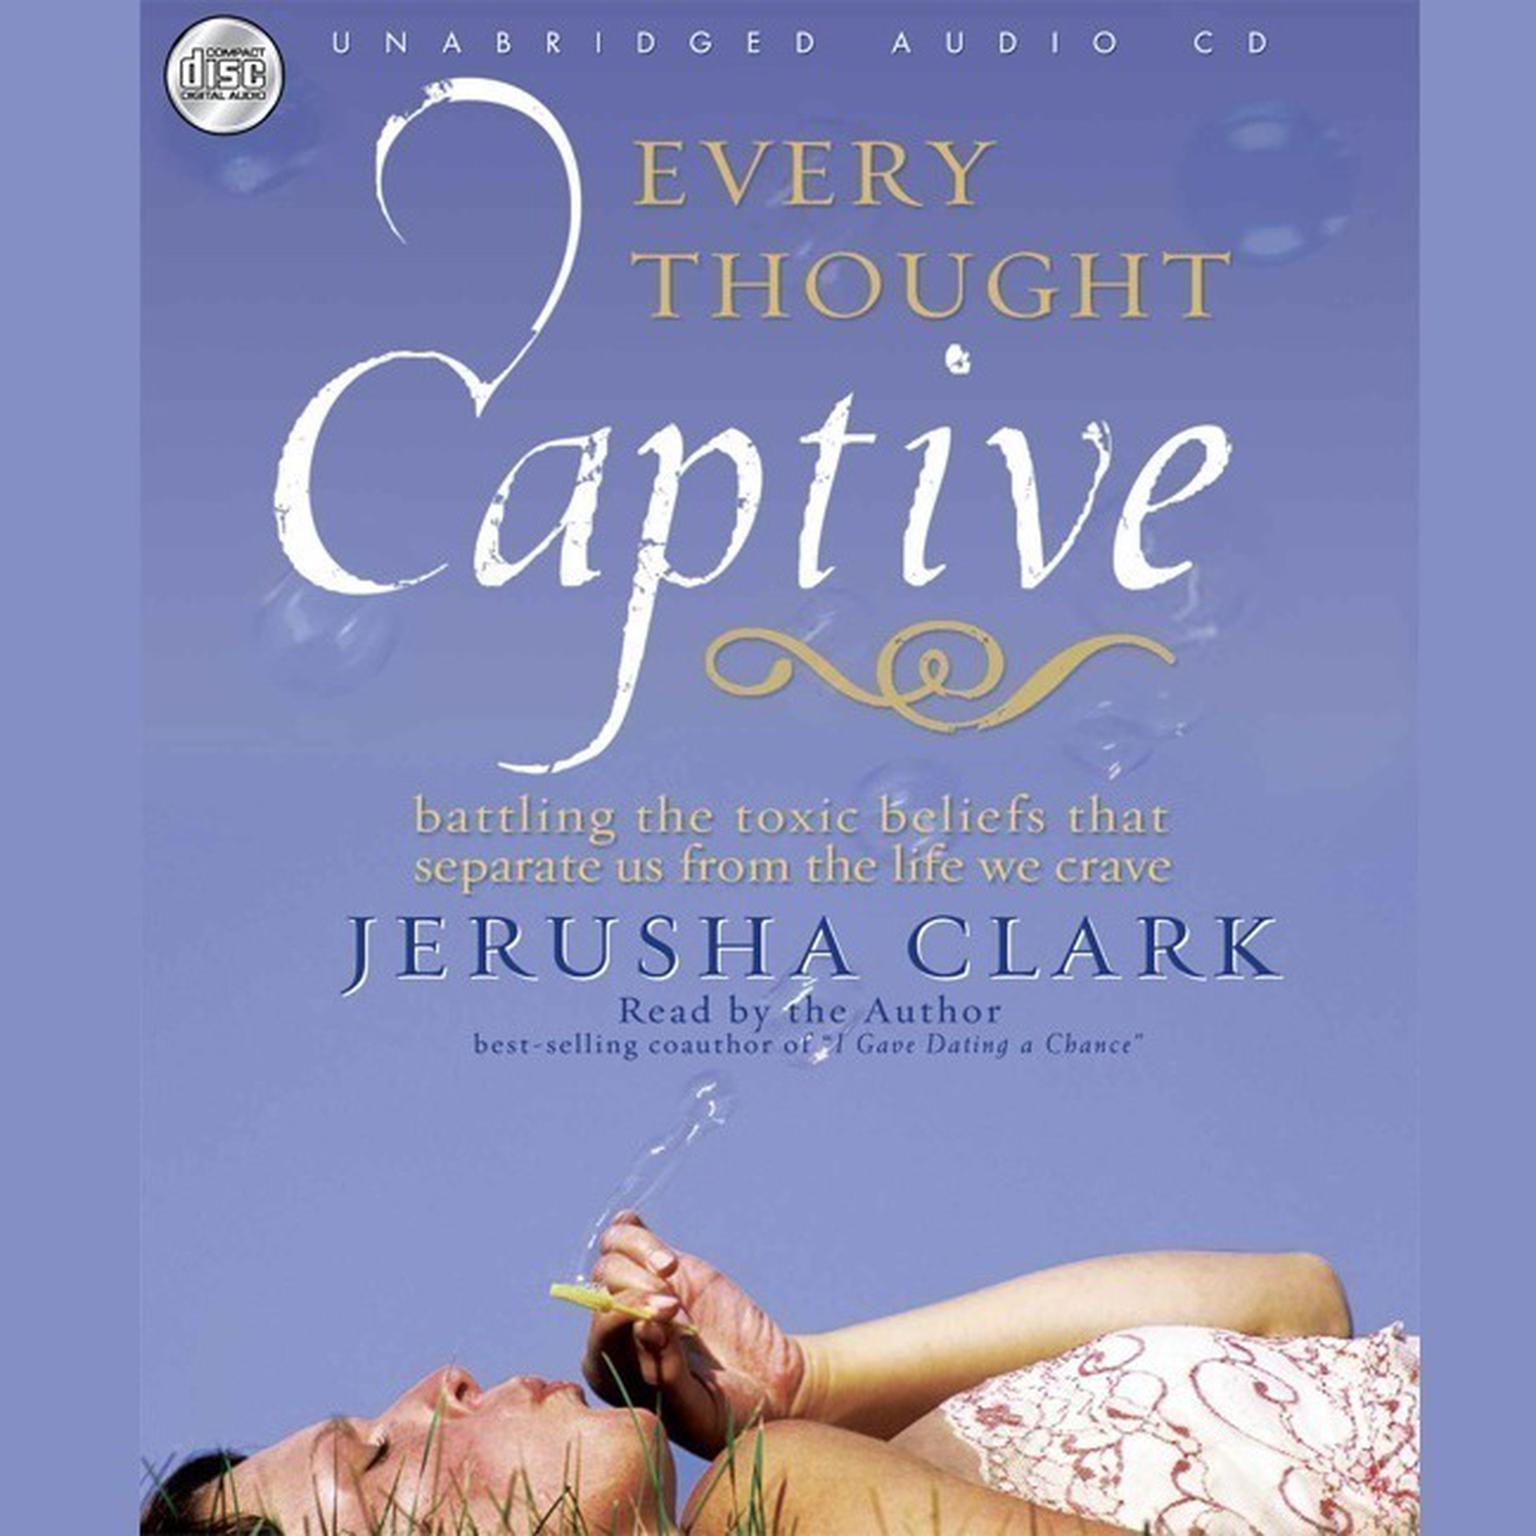 Every Thought Captive: Battling the Toxic Belief that Separates Us From the Life We Crave Audiobook, by Jerusha Clark